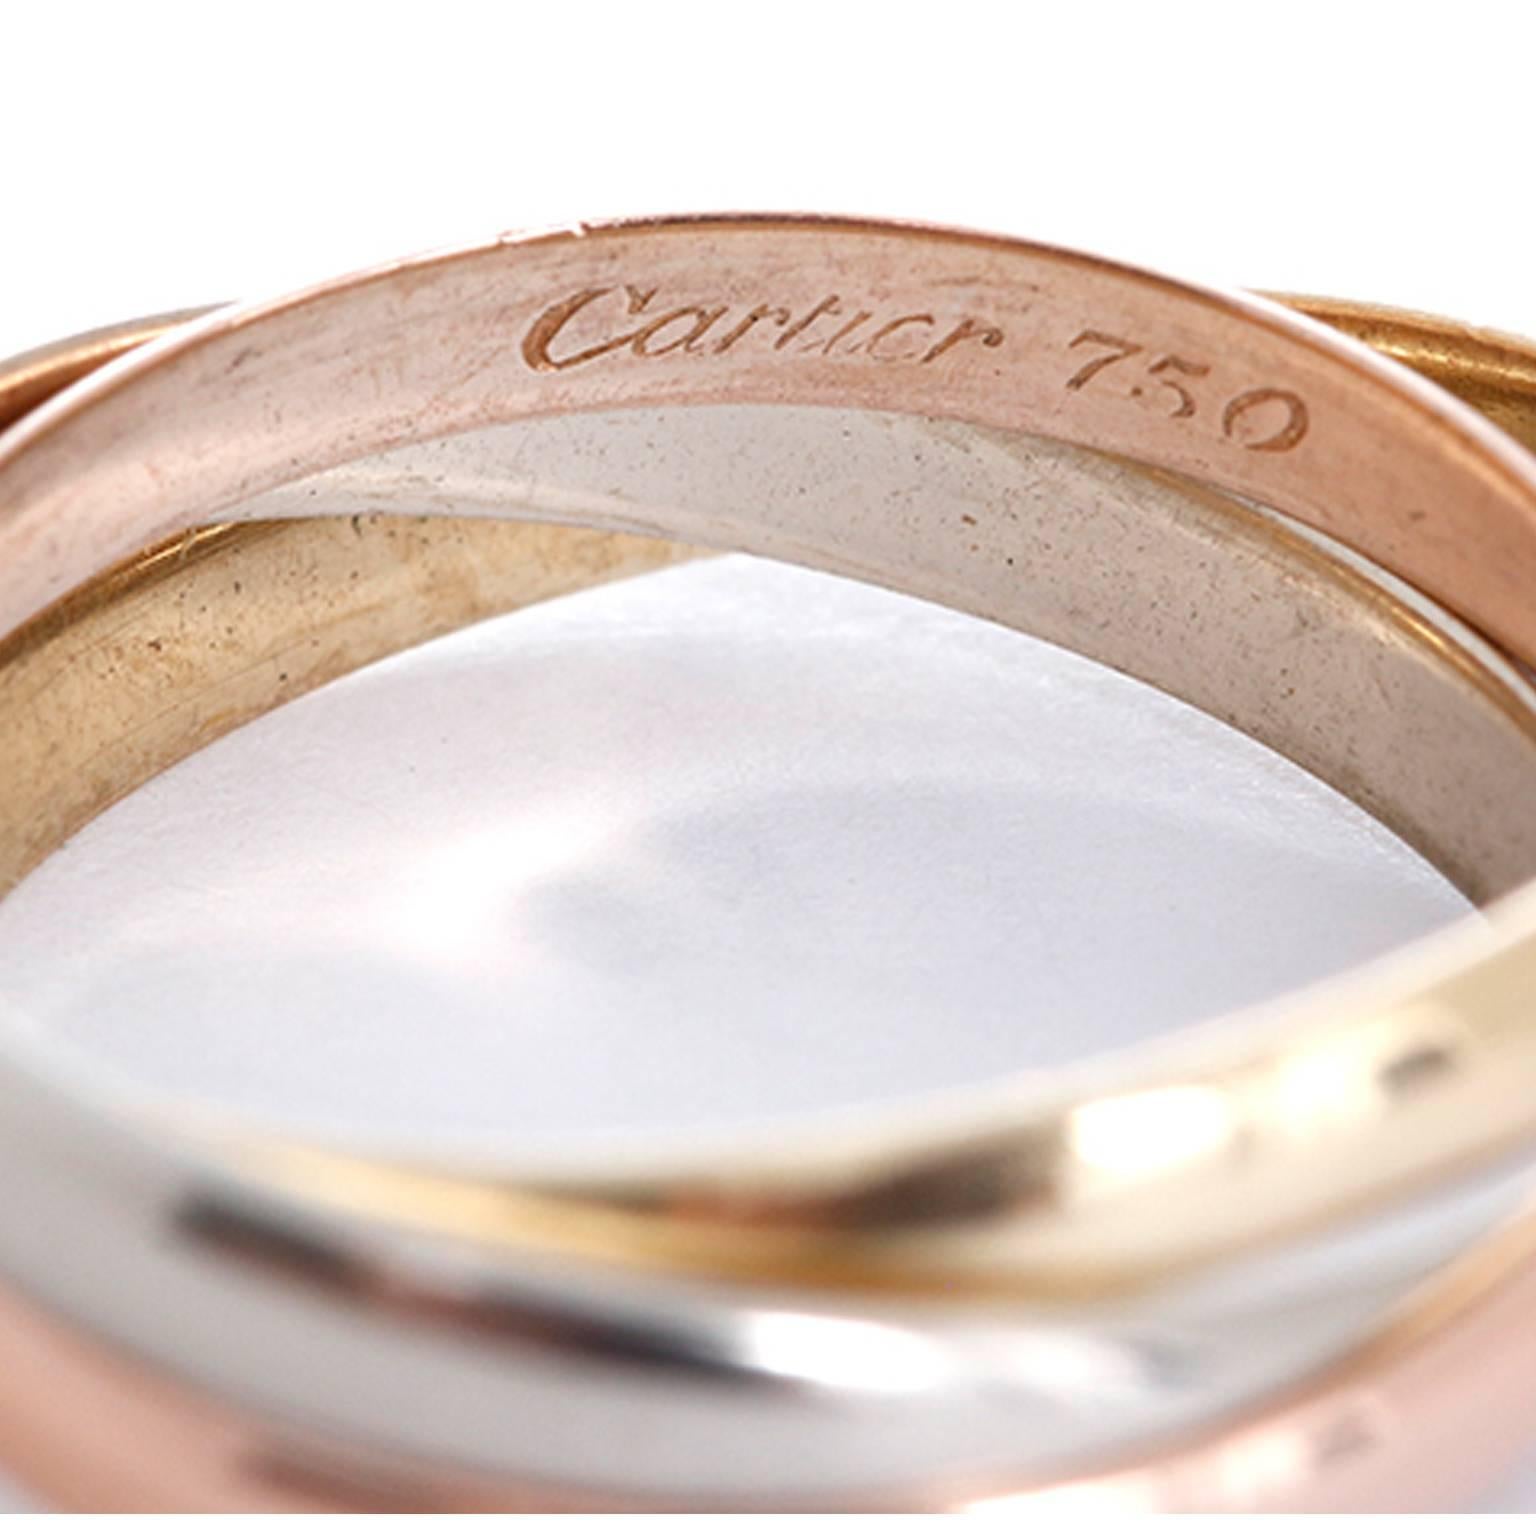 Cartier Trinity 18K Tri-Color Ring Sz. 51(US 5-3/4) -  This Cartier Trinity ring features 18k white, yellow, and pink gold. Three symbolic colors: pink for love, yellow for fidelity and white for friendship. Small model; total weight is 3.9 grams.